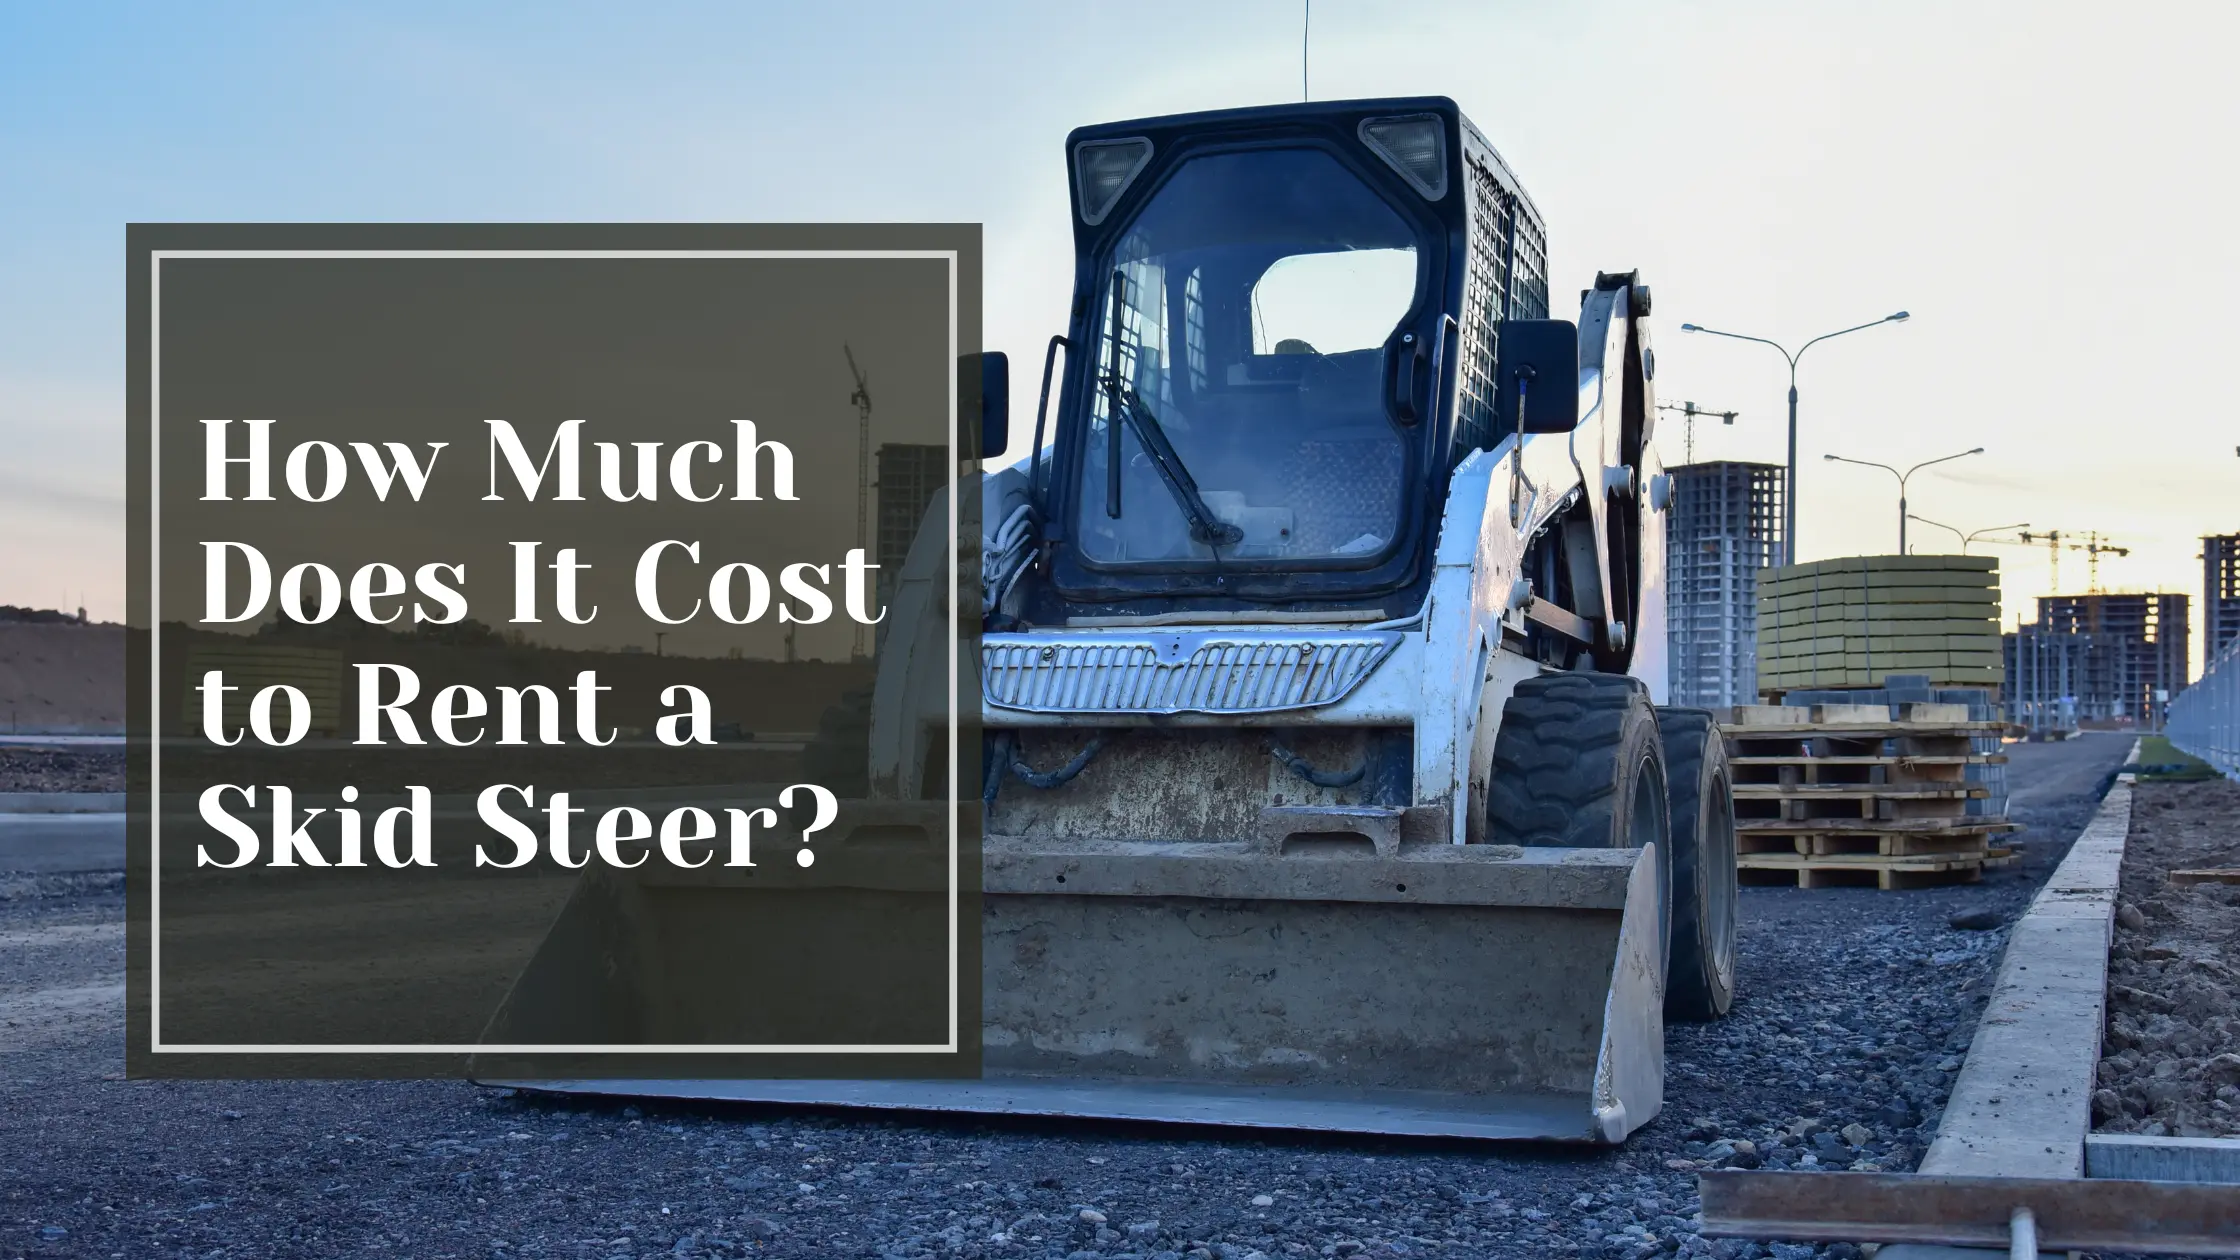 How Much Does It Cost to Rent a Skid Steer?